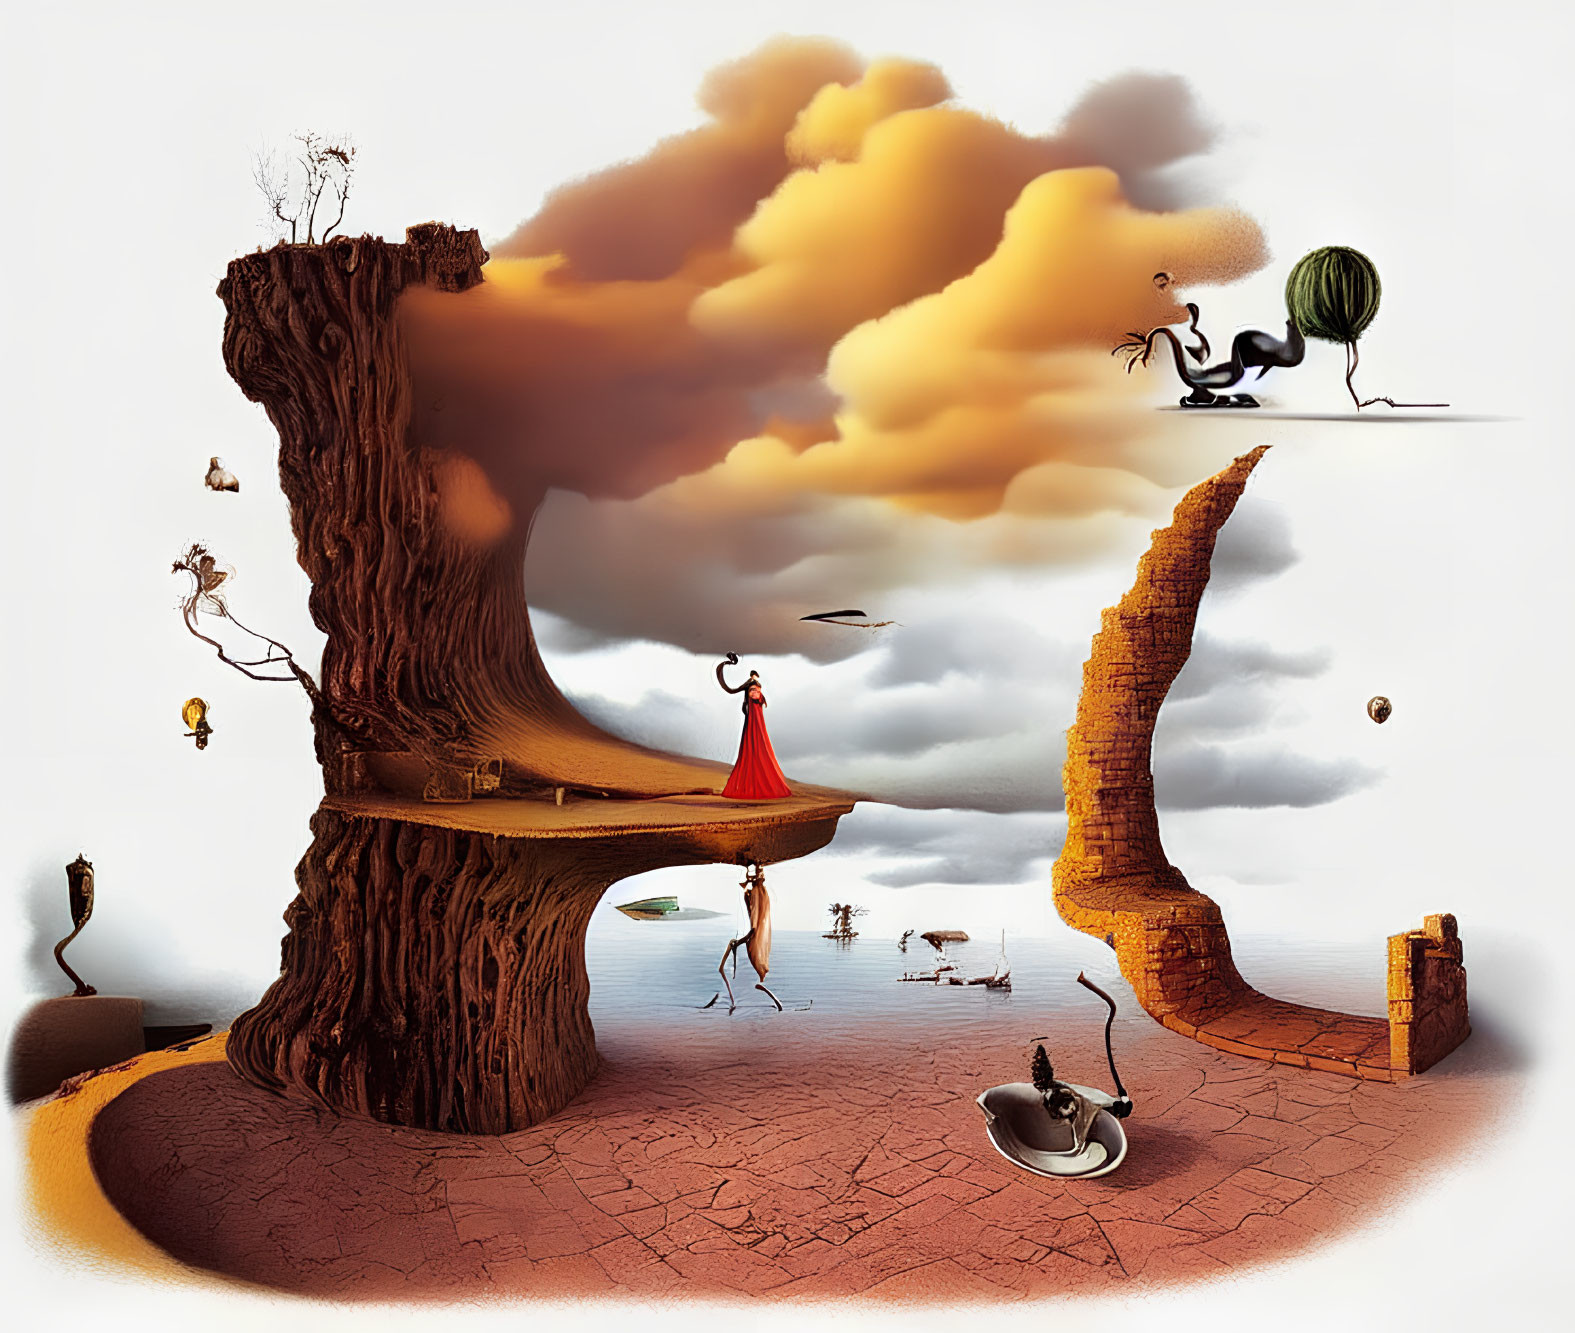 Surreal landscape with tree stump, curved structures, fantastical beings, red-cloaked figure